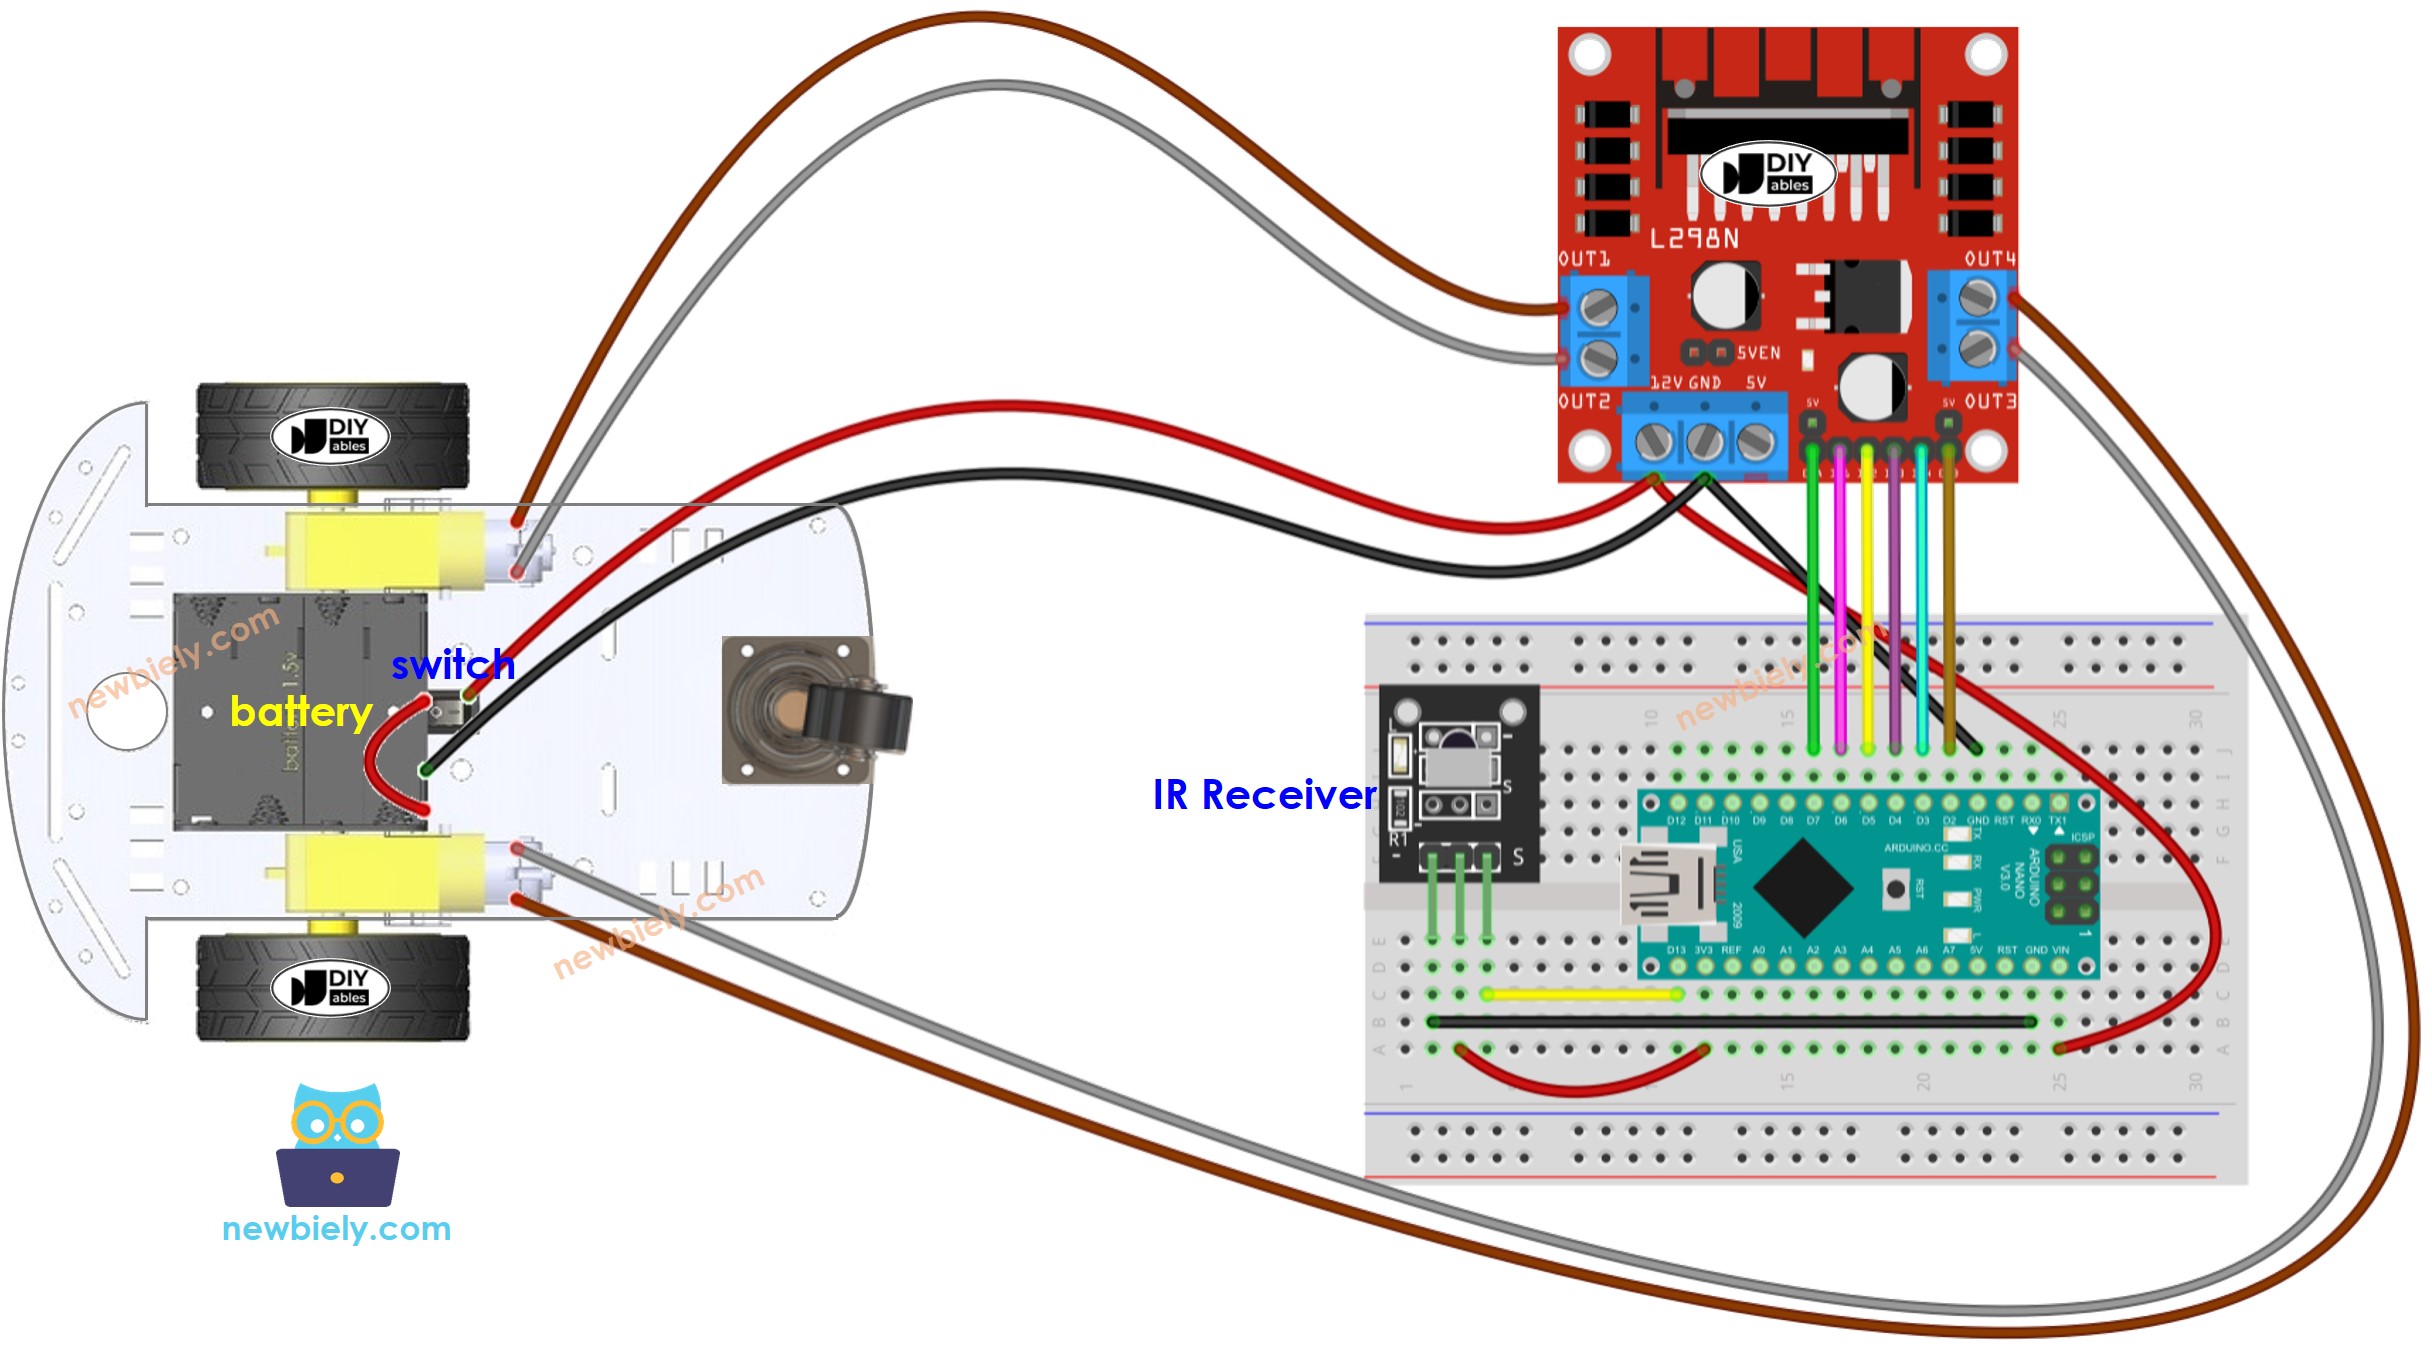 The wiring diagram between Arduino Nano and 2WD car